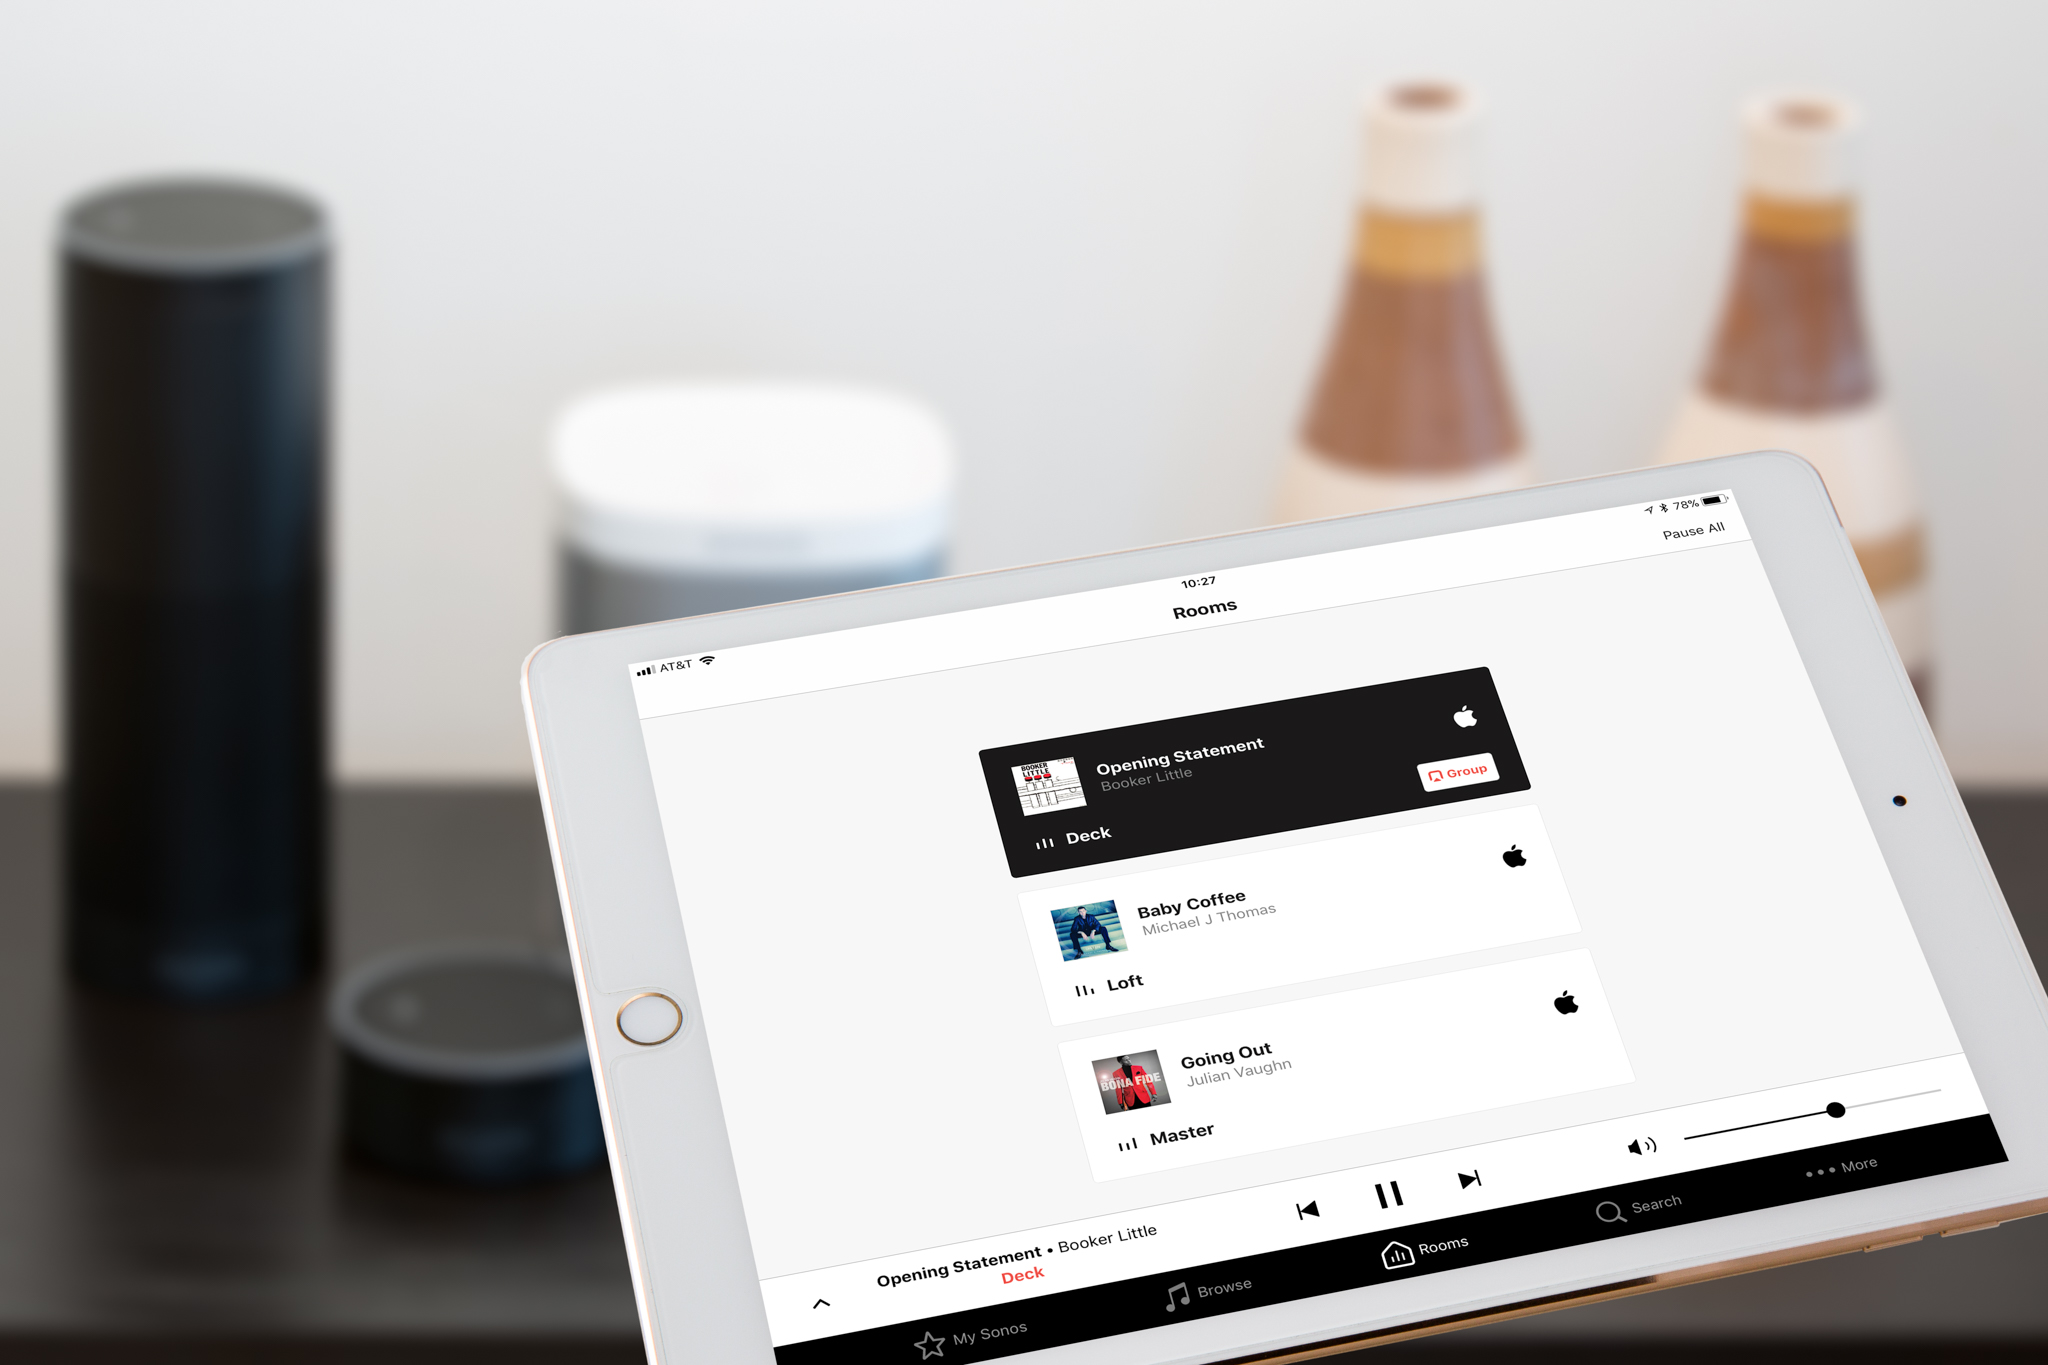 The Sonos app has been redesigned in tandem with the addition of Amazon Alexa services. Short and simple room names work best. Image: Digitized House.v